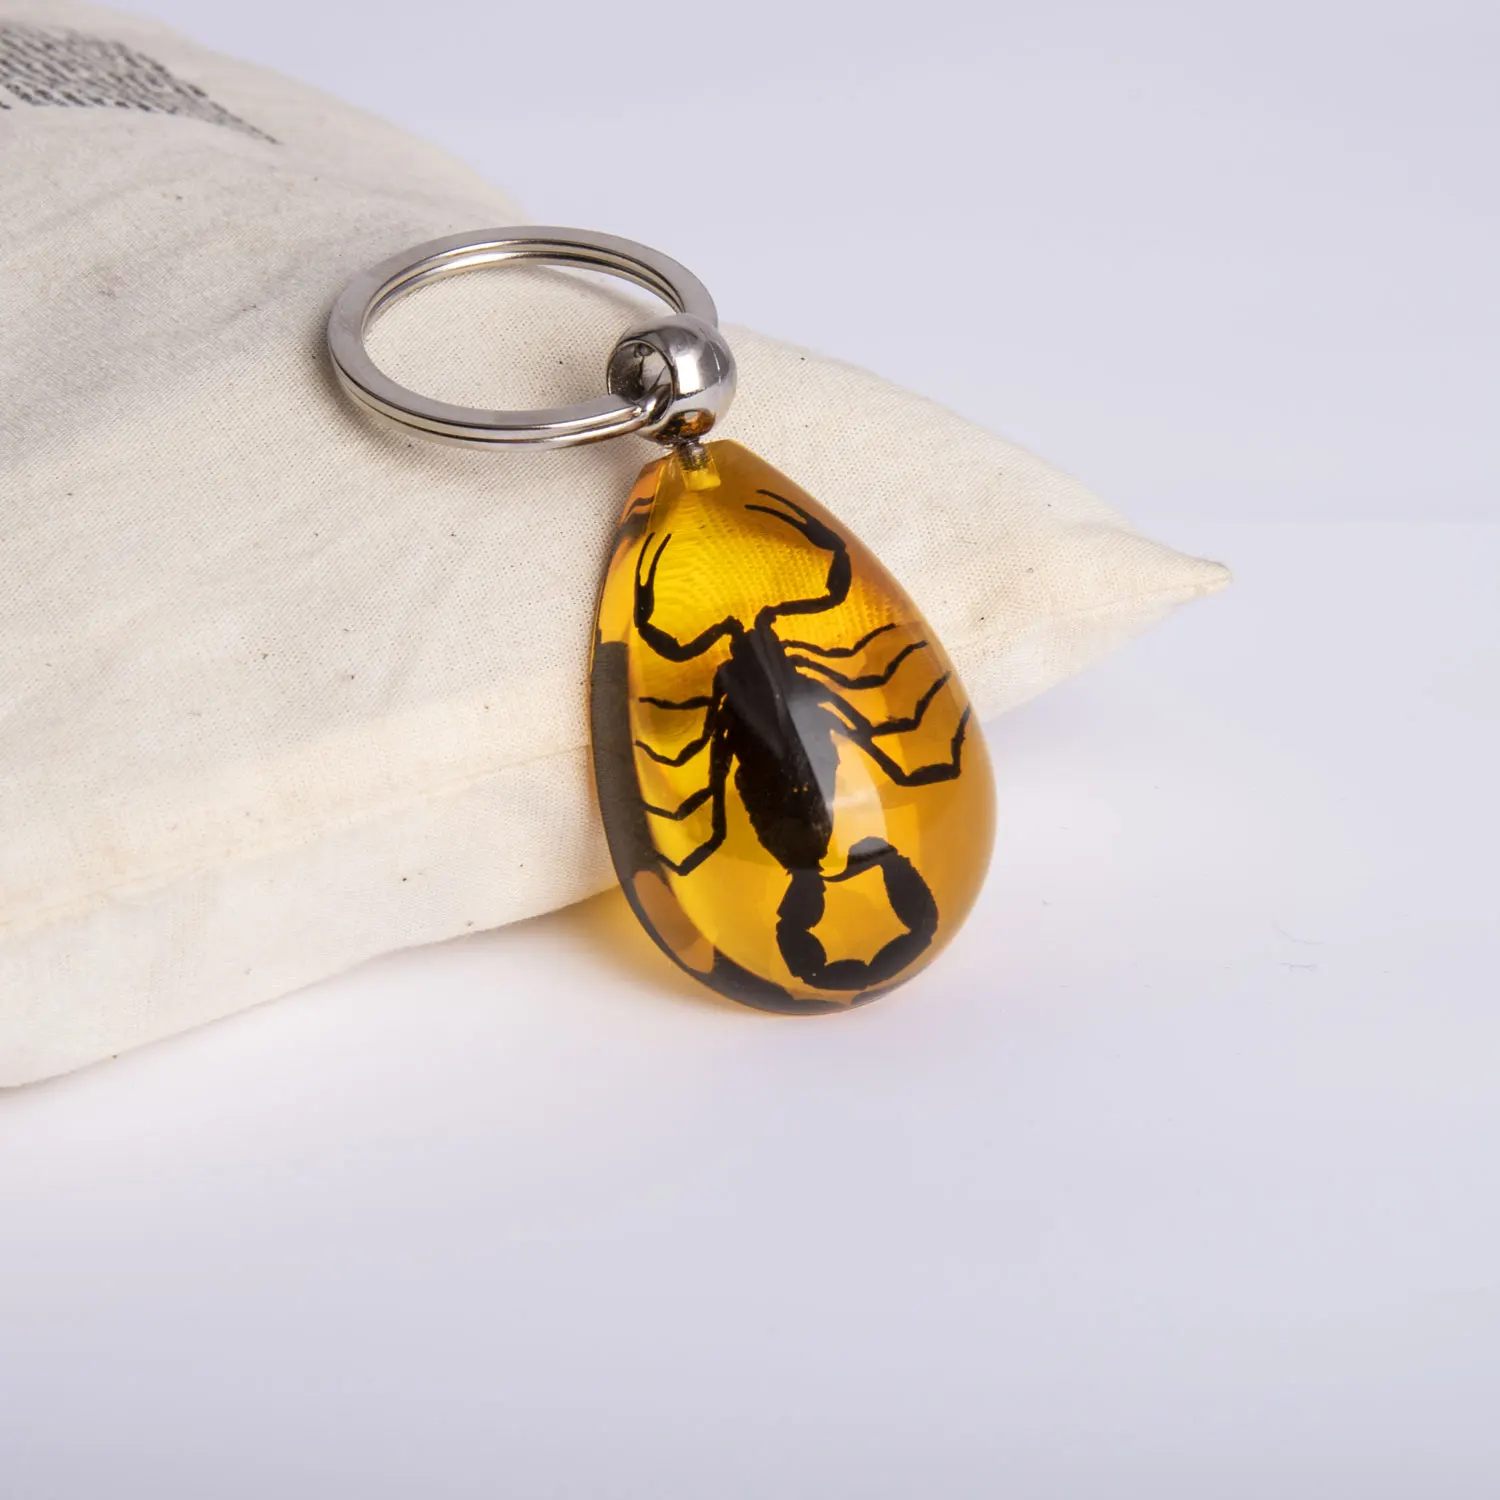 Two Bees Insect KeyChain Taxidermy Lucite Art Flower Design Display Keychain